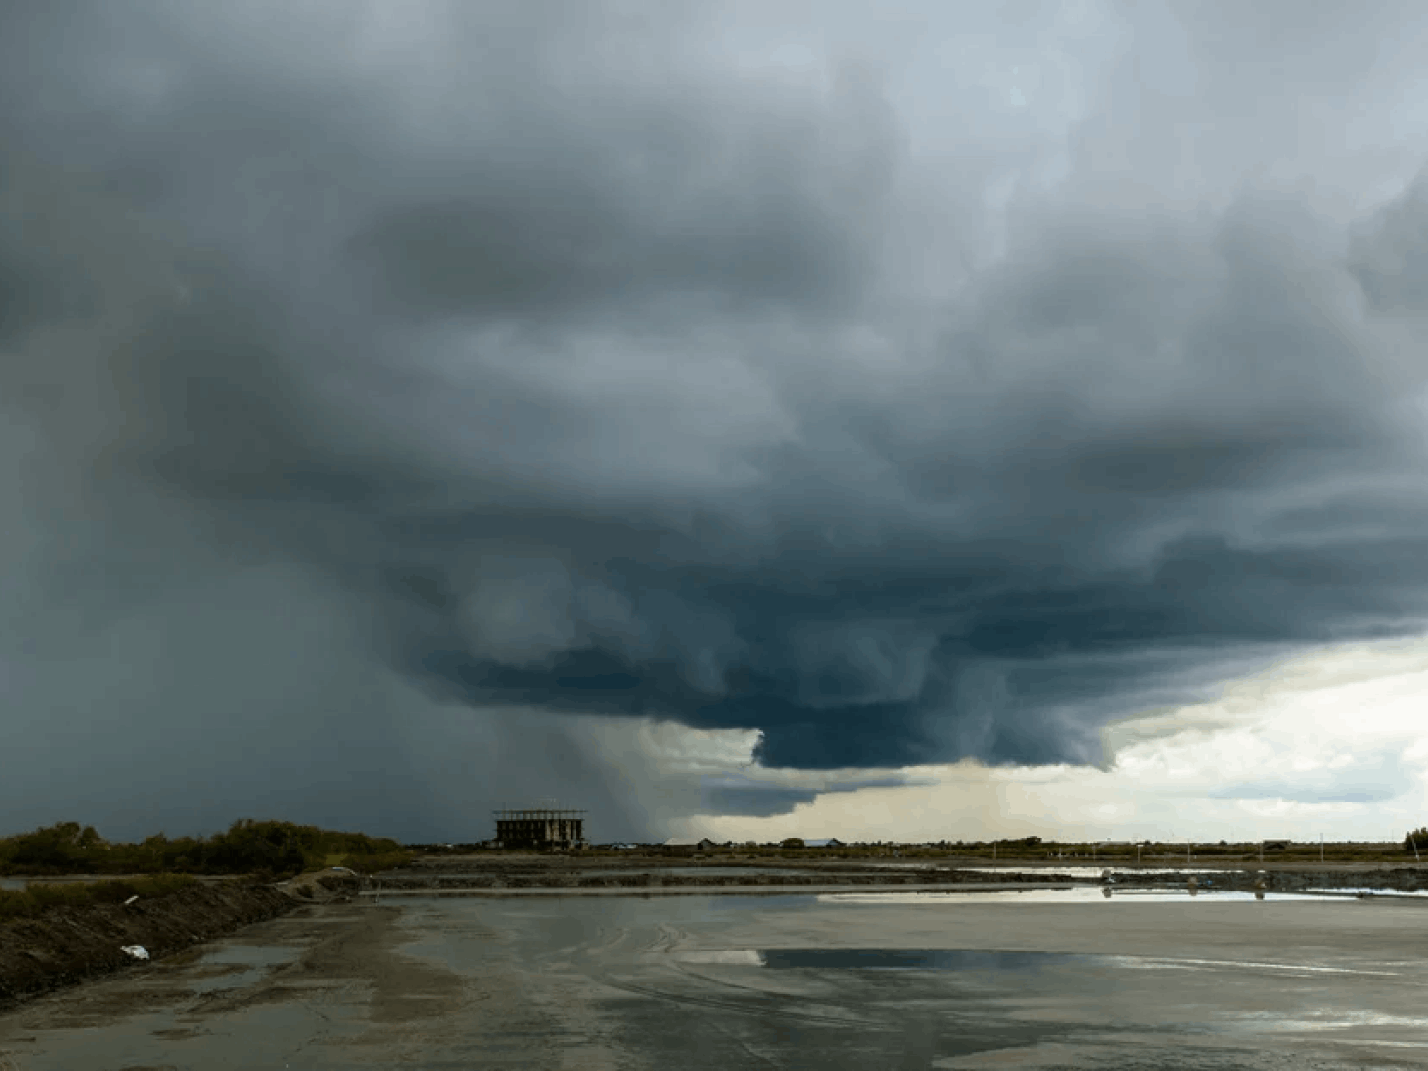 Large storm clouds gathering over wetland